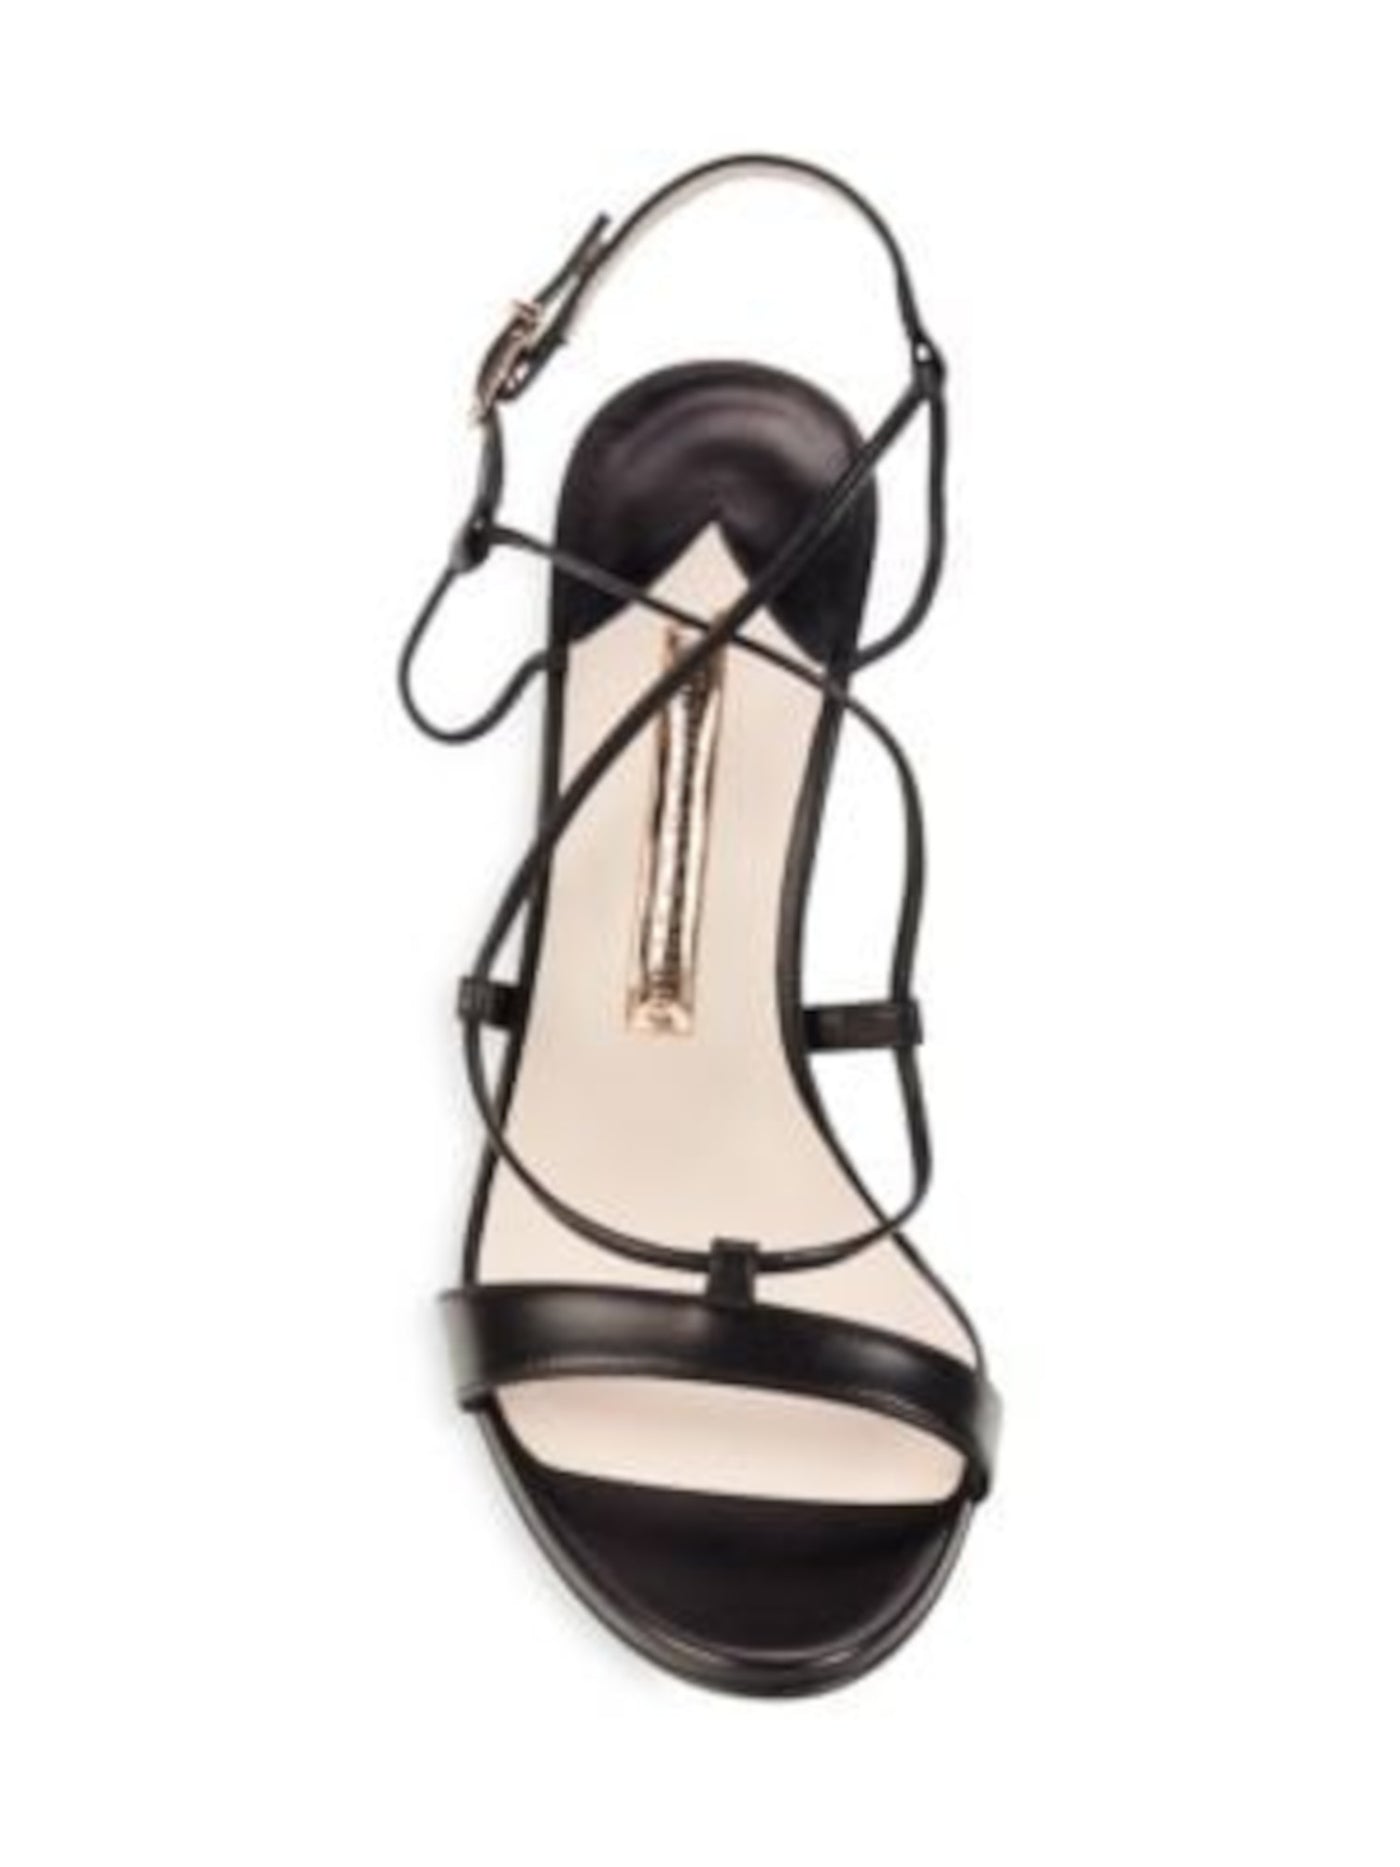 SOPHIA WEBSTER Womens Black Butterfly Strappy Paloma Round Toe Sculpted Heel Buckle Leather Slingback Sandal